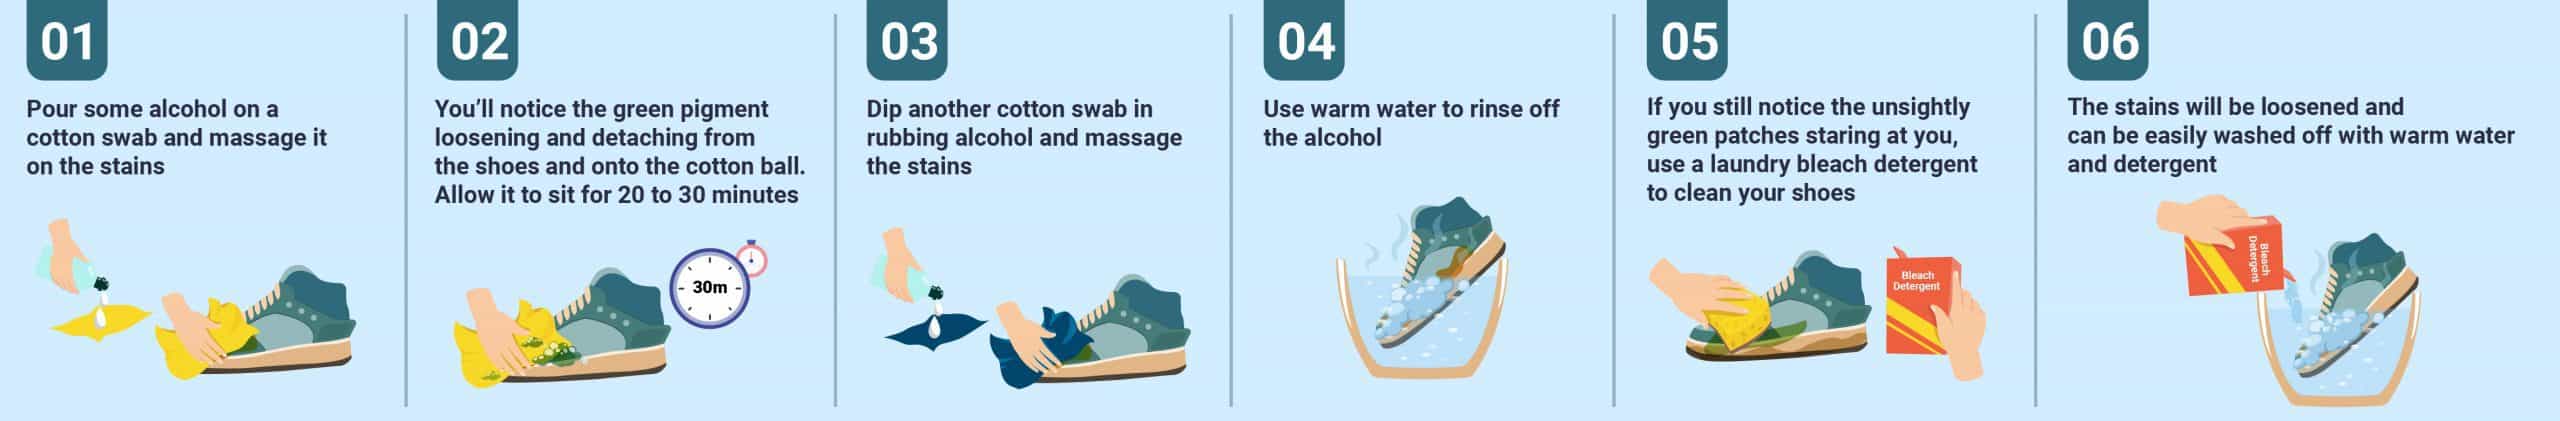 infographic showing 5 steps to use rubbing alcohol